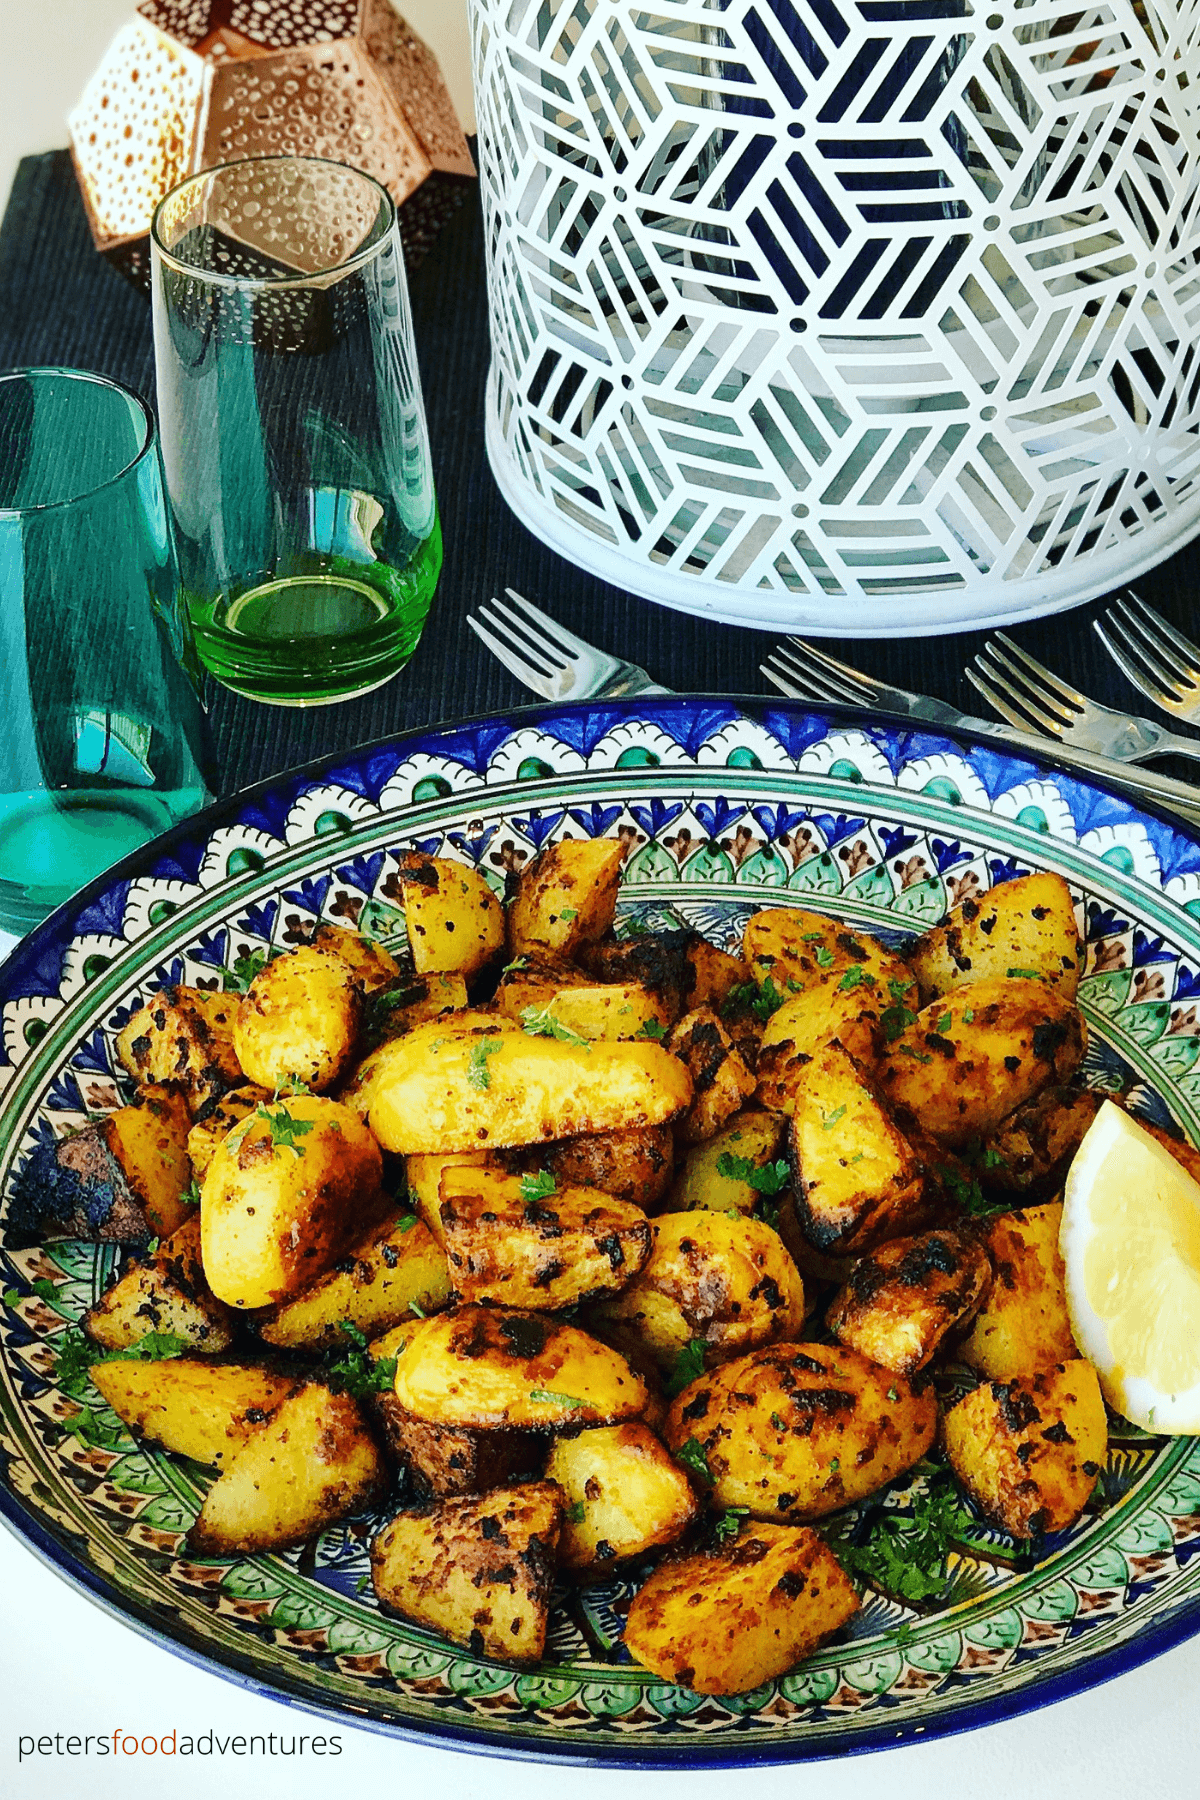 Moroccan Roasted Potatoes are so easy to make. A perfect side dish of crispy roasted potatoes, jam packed with spices like cumin, paprika, turmeric and optional spicy Harissa! No par-boiling, just crispy roasted on a baking sheet or Air Fryer, perfect with your roast chicken dinner or a tagine meal!